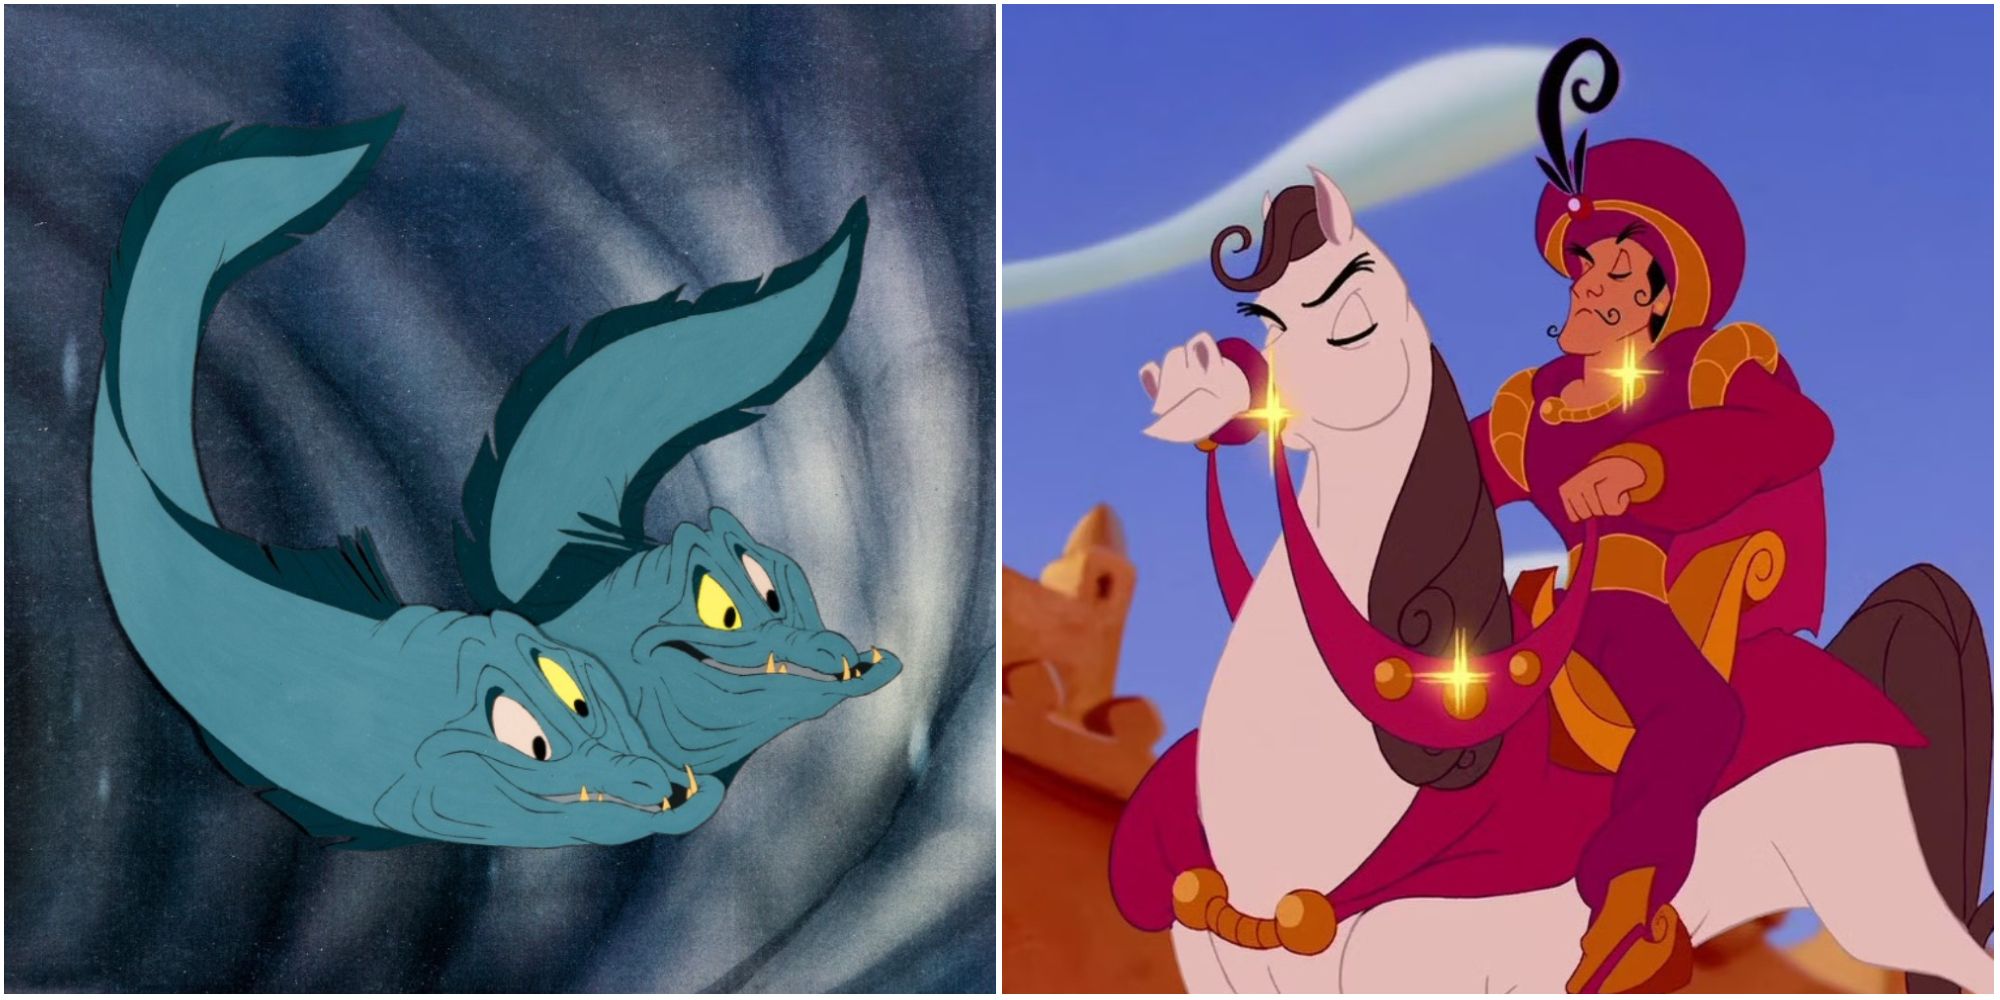 Flotsam & Jetsam in The Little Mermaid and Prince Achmed in Aladdin